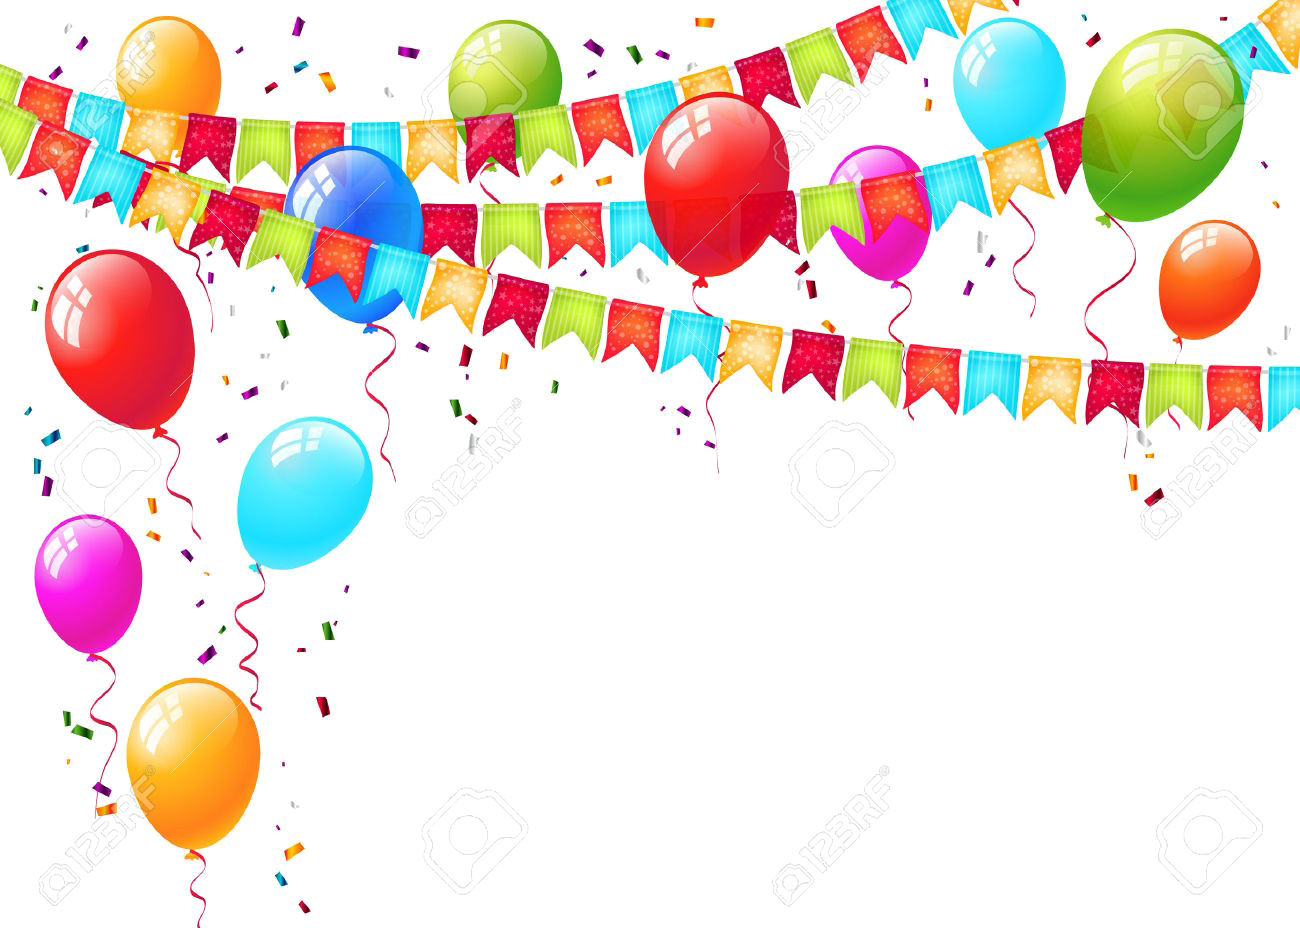 Festive Balloonsand Banners Background PNG